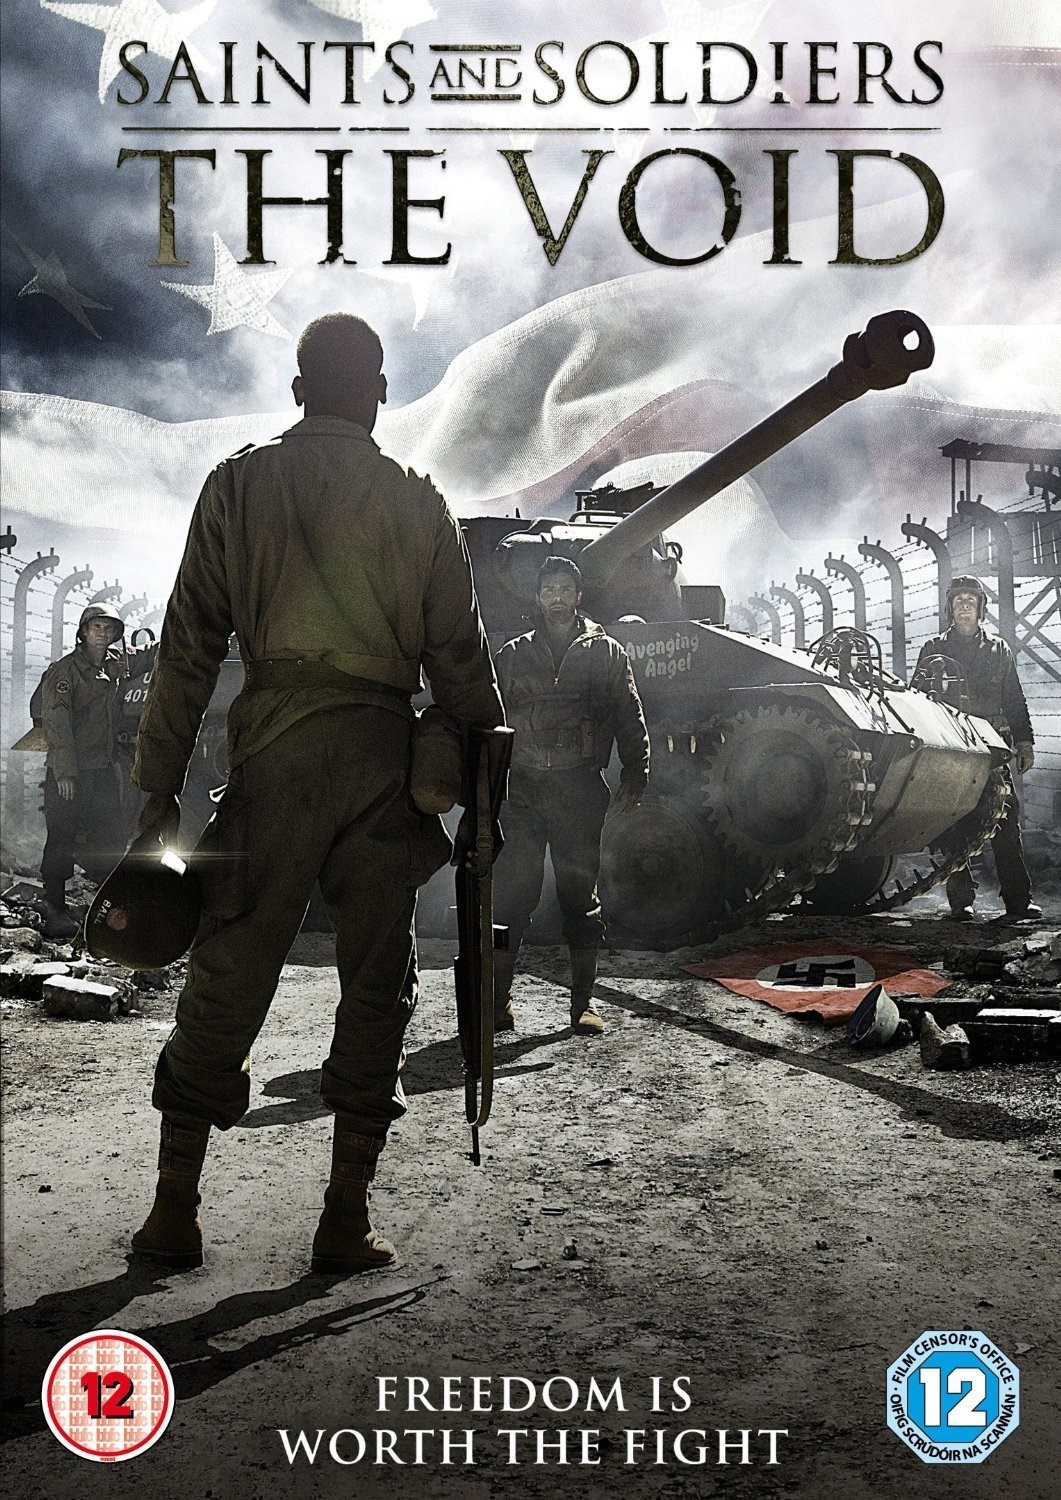 Saints and soldiers: the void - 2014